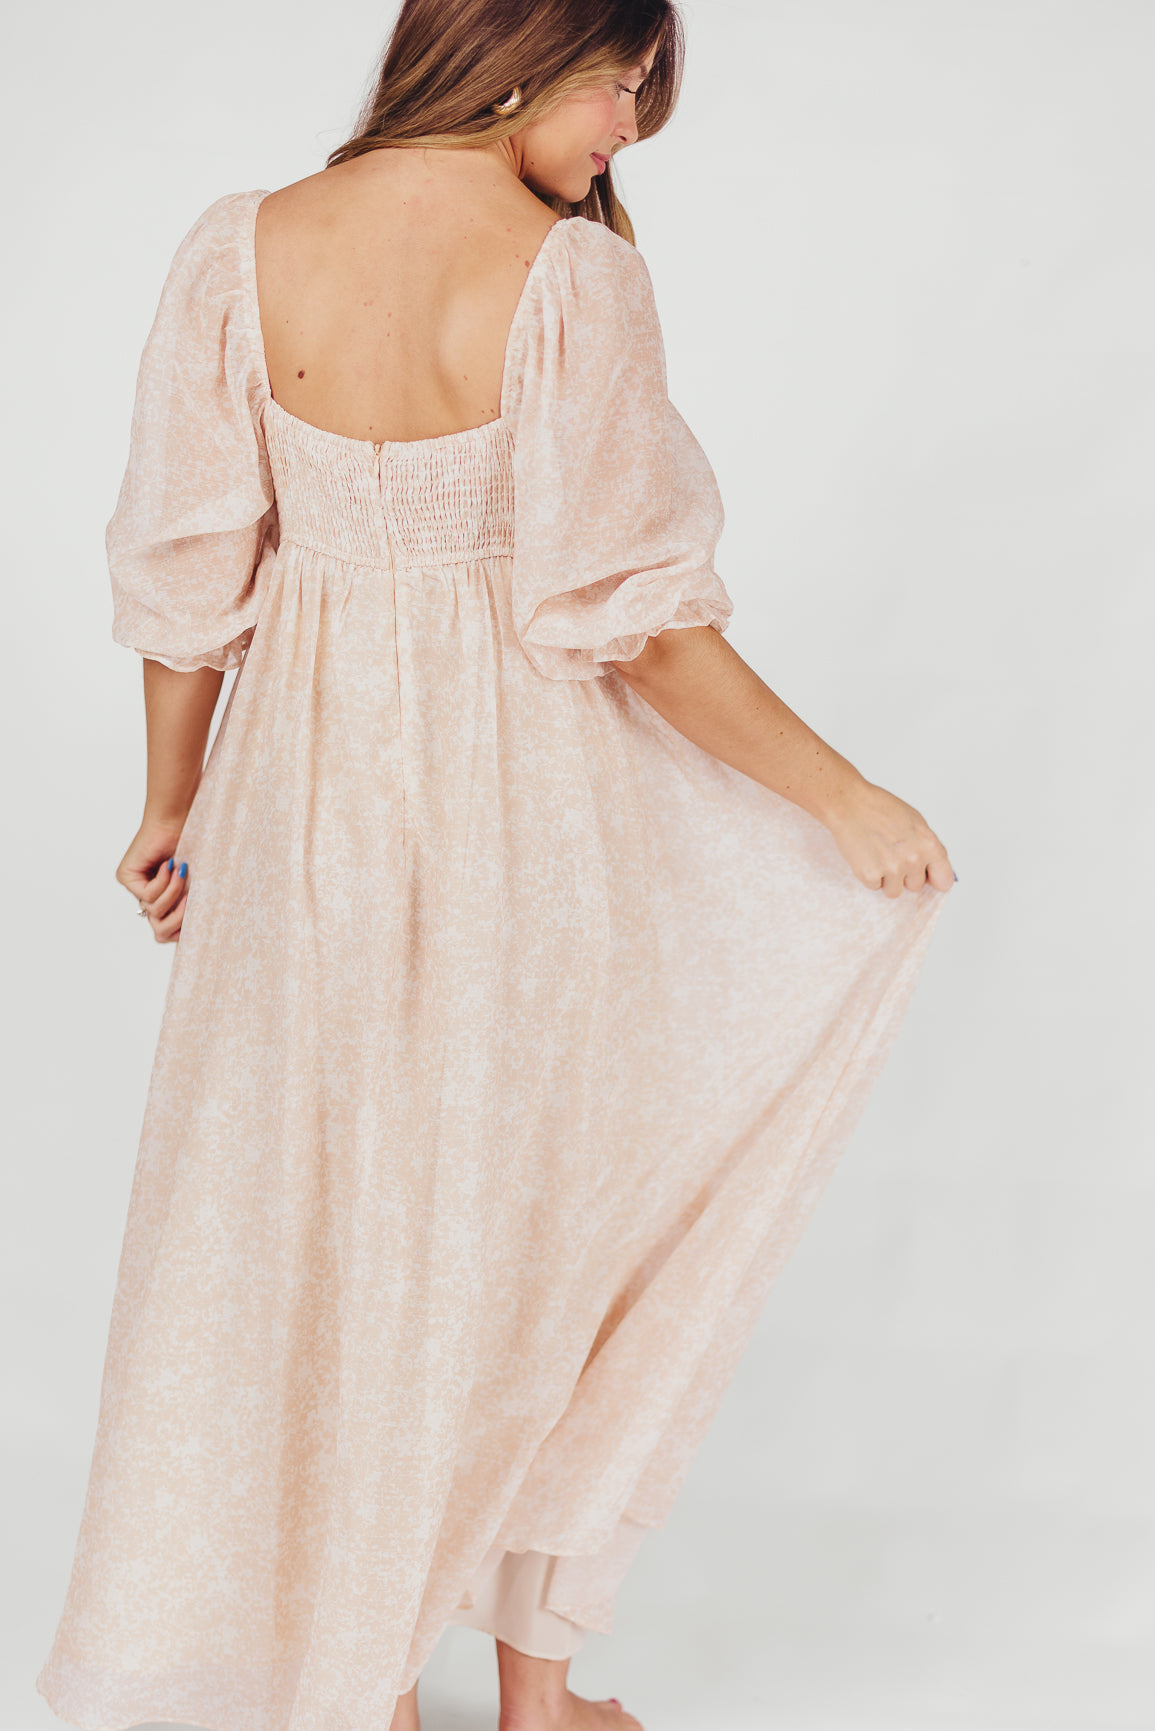 *New* Mona Maxi Dress with Smocking in Light Peach - Bump Friendly & Inclusive Sizing (S-3XL)